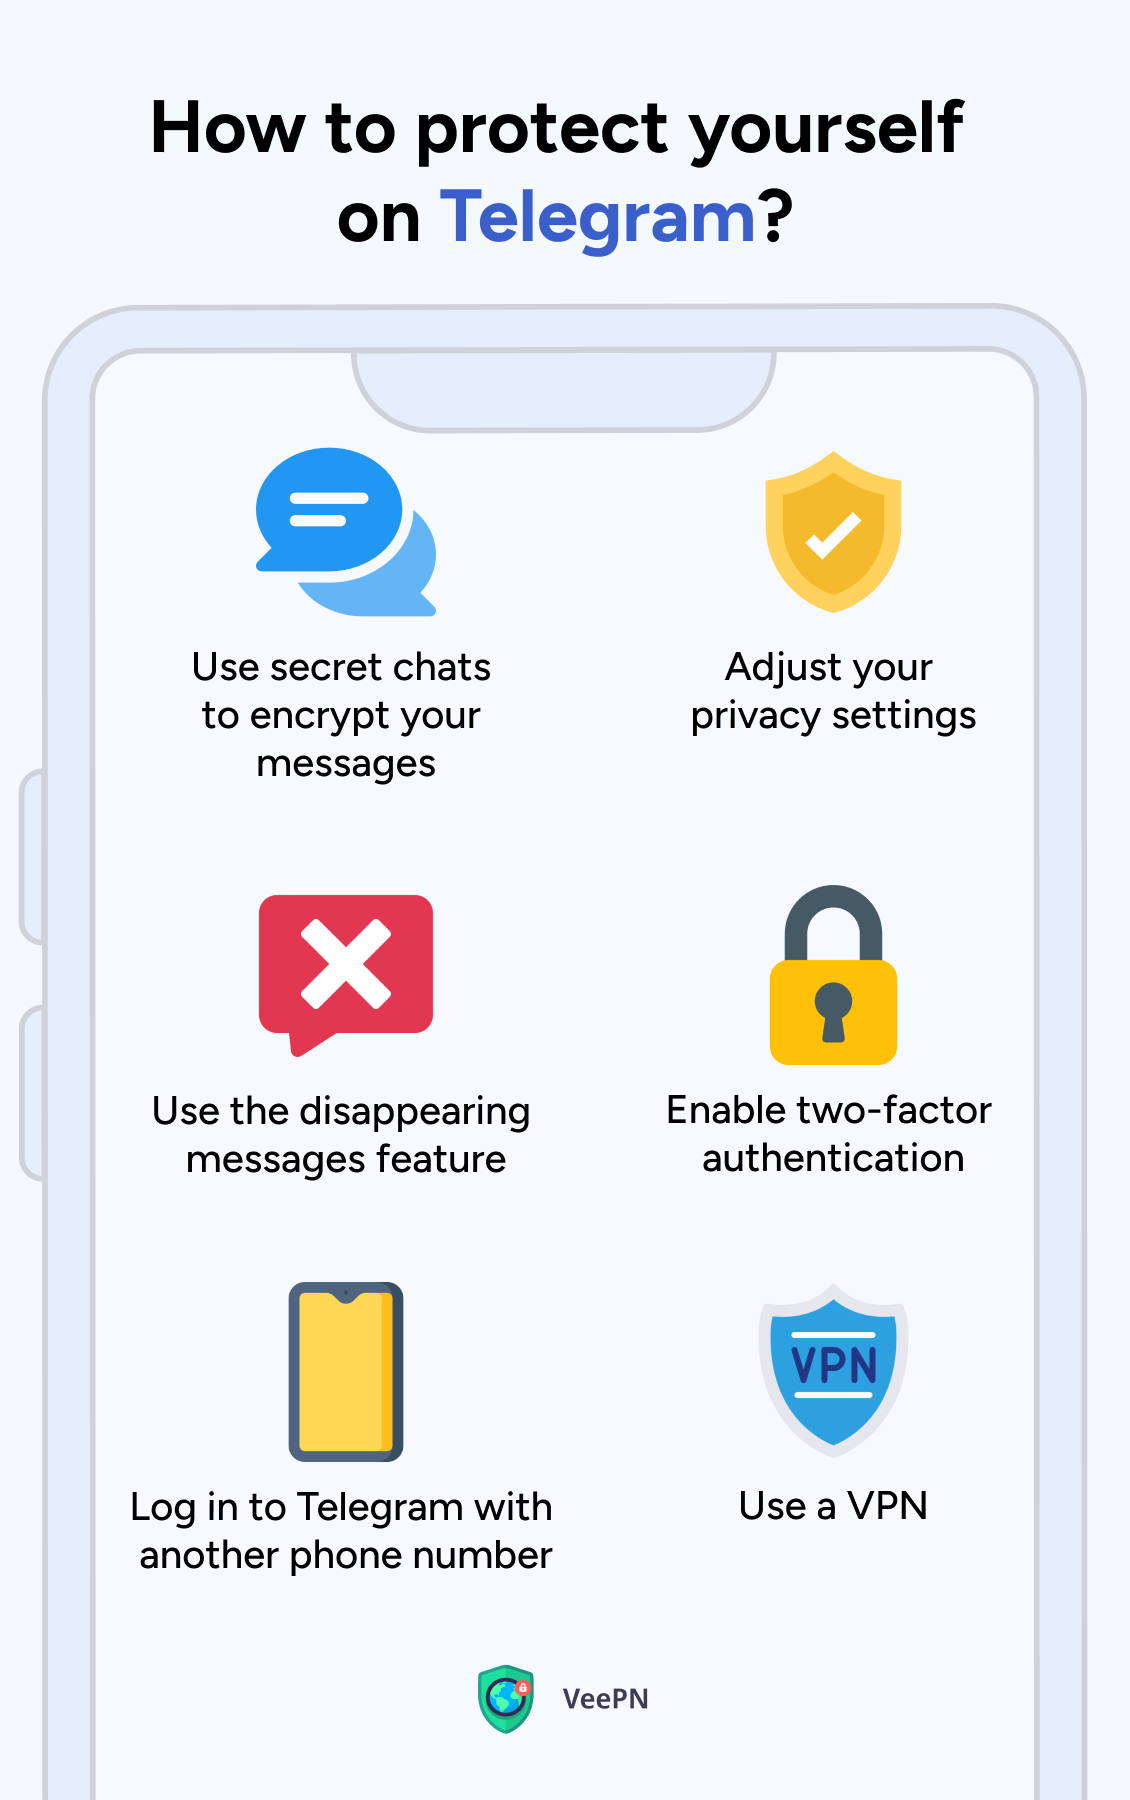 How to protect yourself on Telegram?